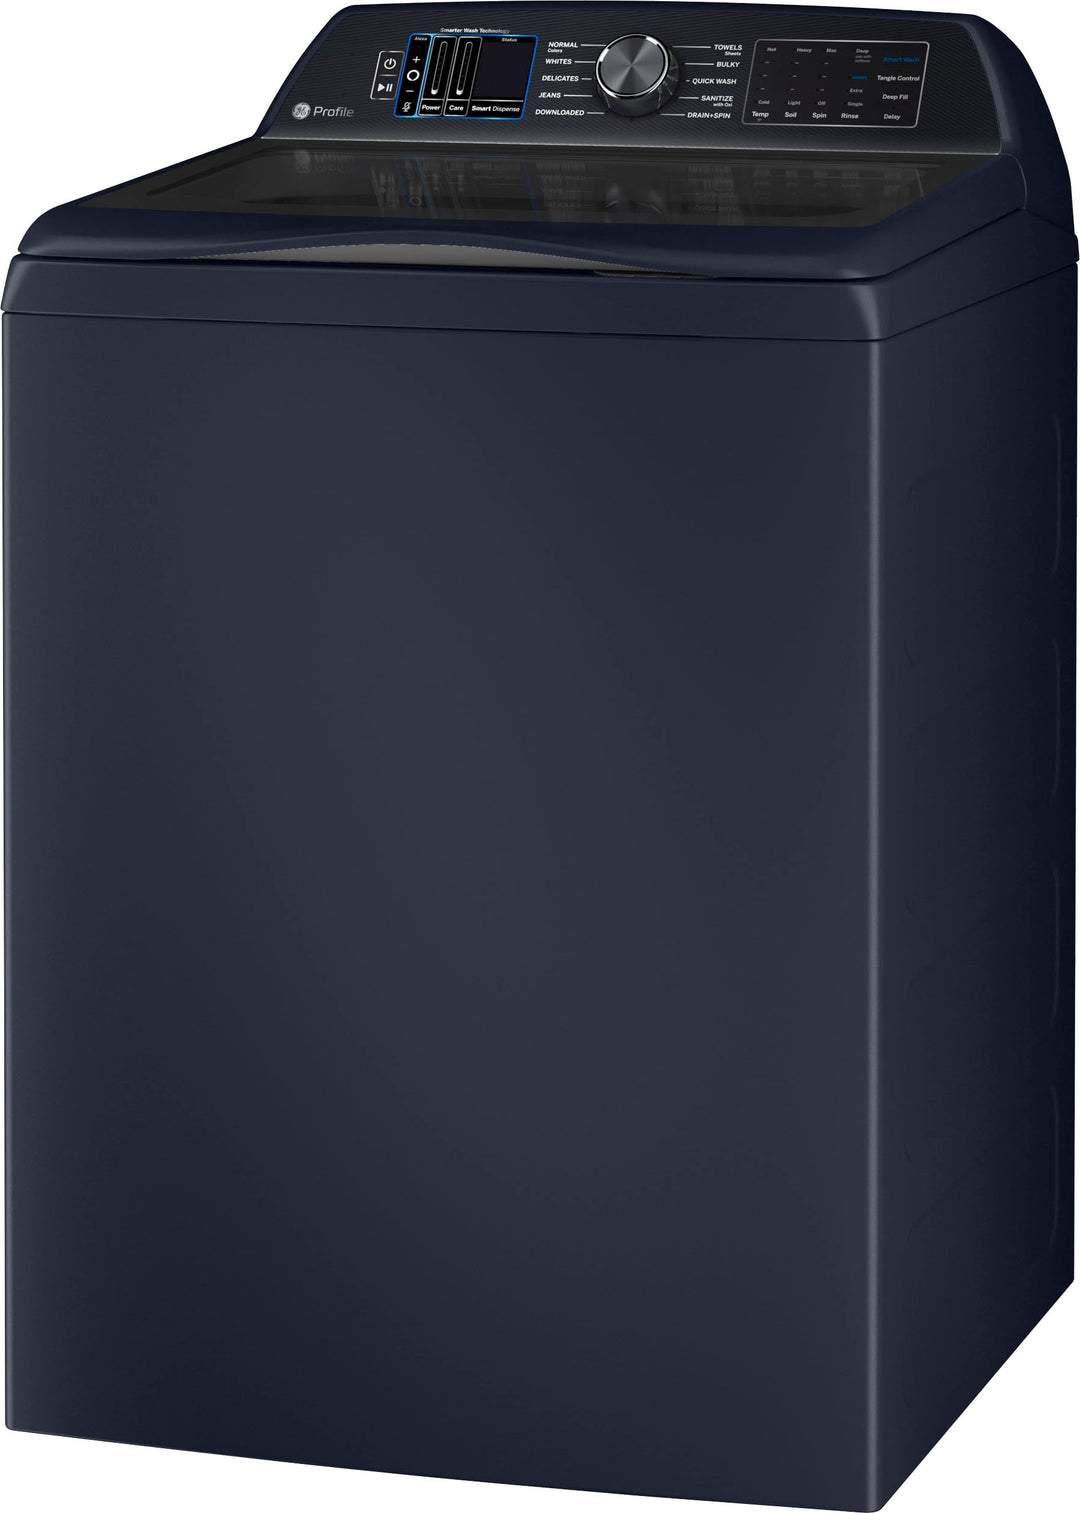 GE Profile - 5.4 Cu. Ft. High Efficiency Top Load Washer with Smarter Wash Technology, Easier Reach & Microban Technology - Sapphire blue_4